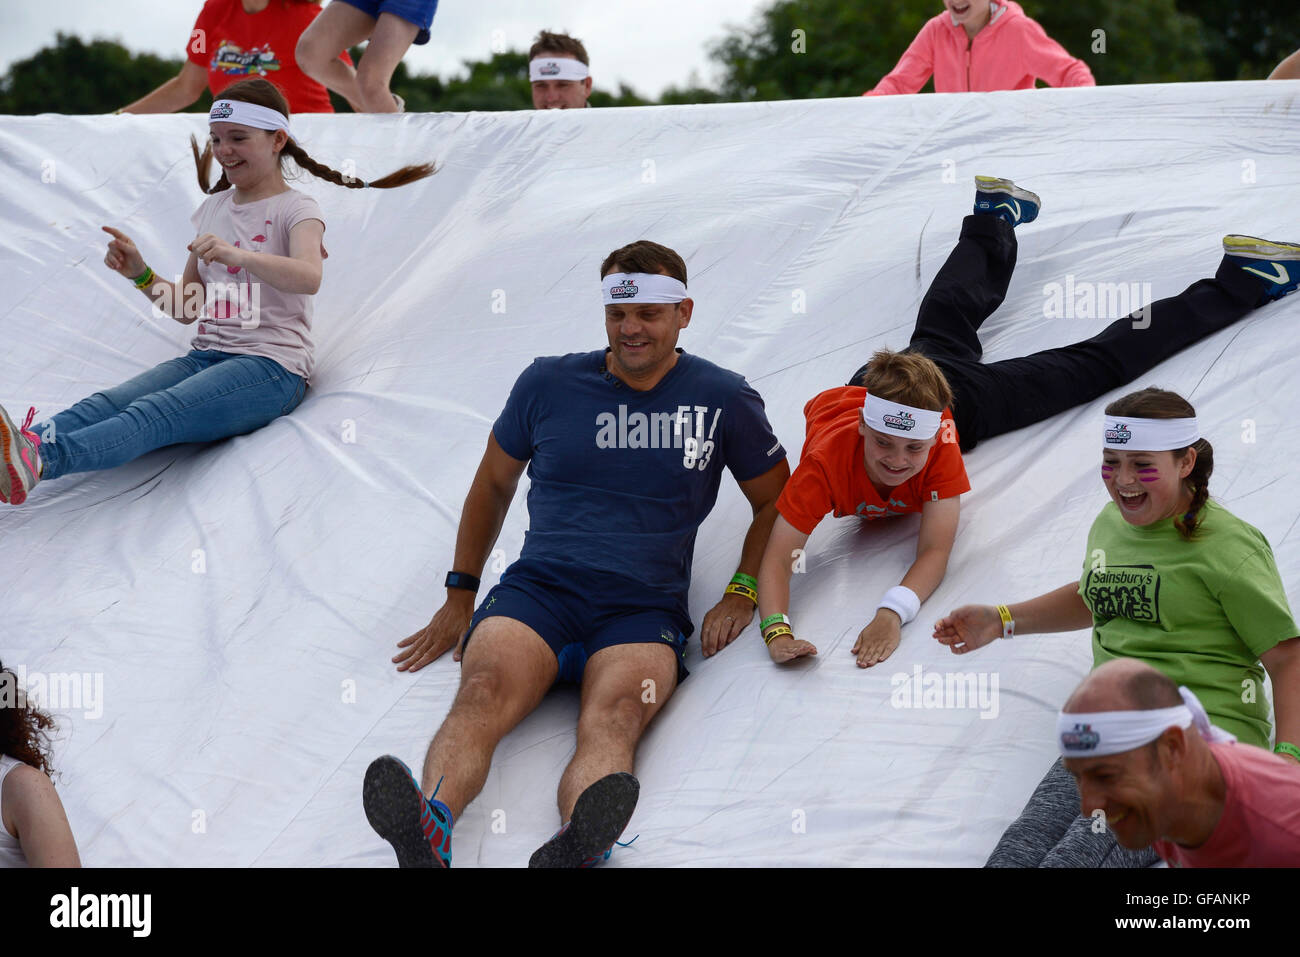 Carfest North, Bolesworth, Cheshire, UK. 30th July, 2016. Competitors on the Gung Ho Giant Inflatable obstacle course. The event is the brainchild of Chris Evans and features 3 days of cars, music and entertainment with profits being donated to the charity Children in Need. Credit:  Andrew Paterson/Alamy Live News Stock Photo